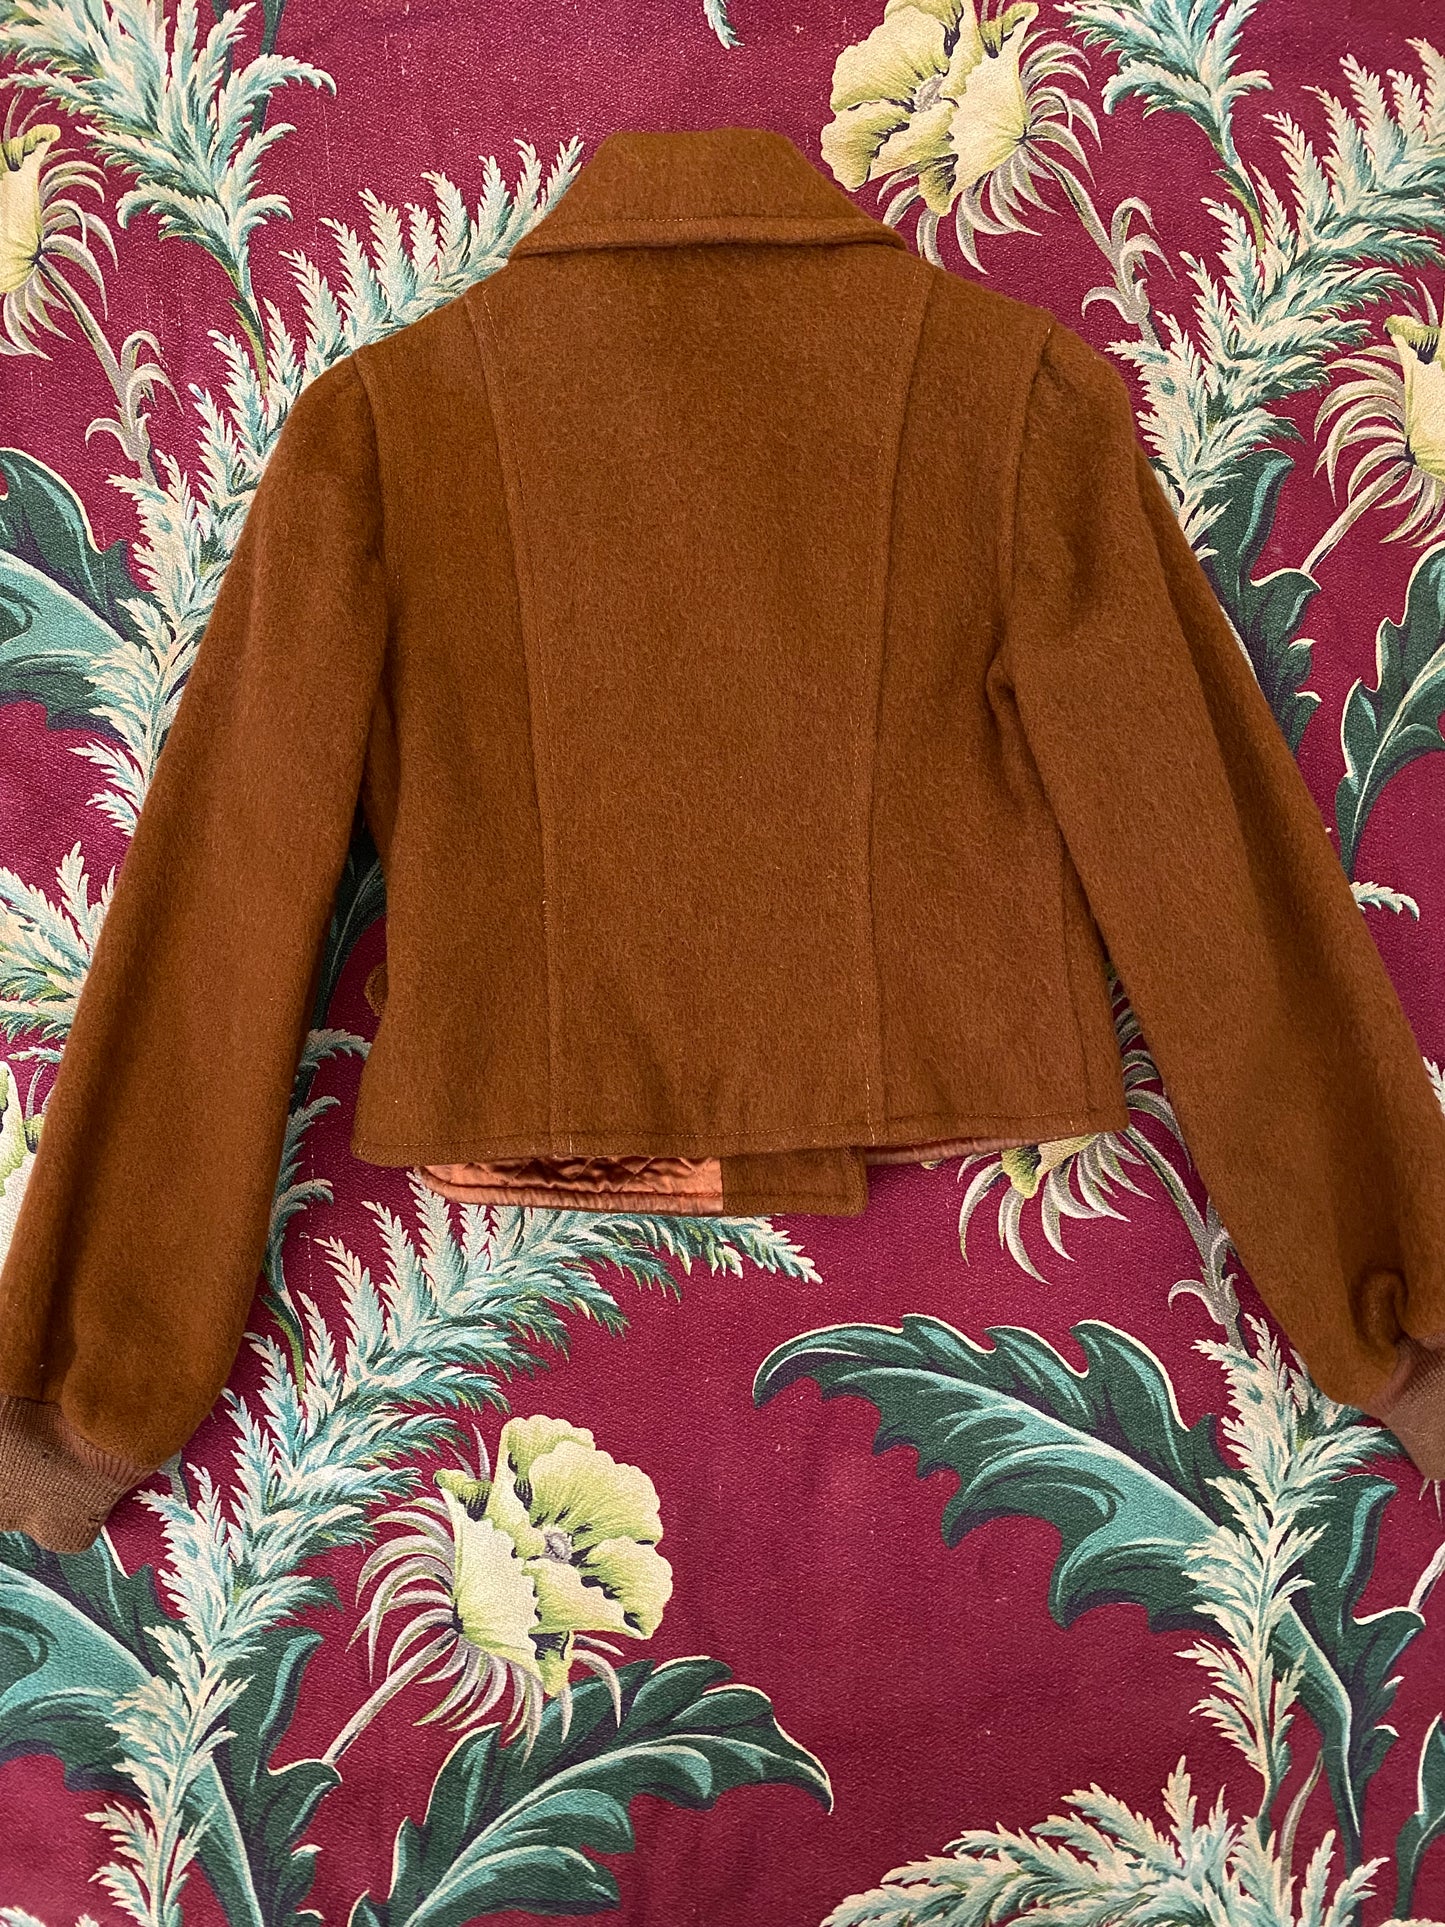 1930s Rare Brown Embroidered Cropped Ski Winter Jacket- S/M